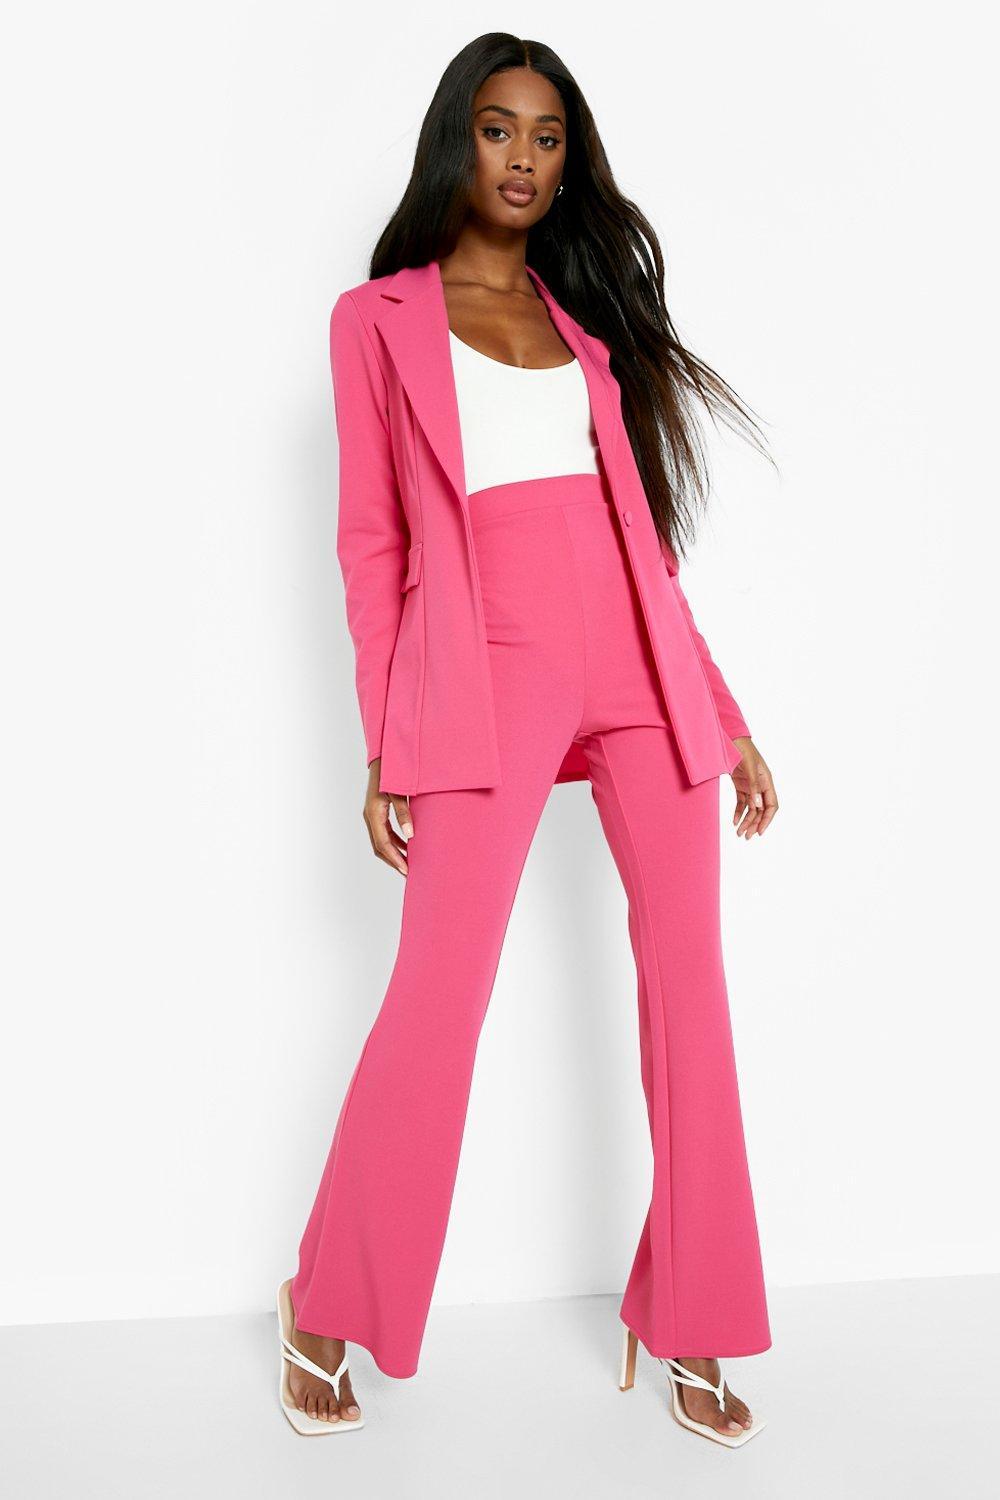 For summer party season an antiwork suit is your passport to fun   Fashion  The Guardian